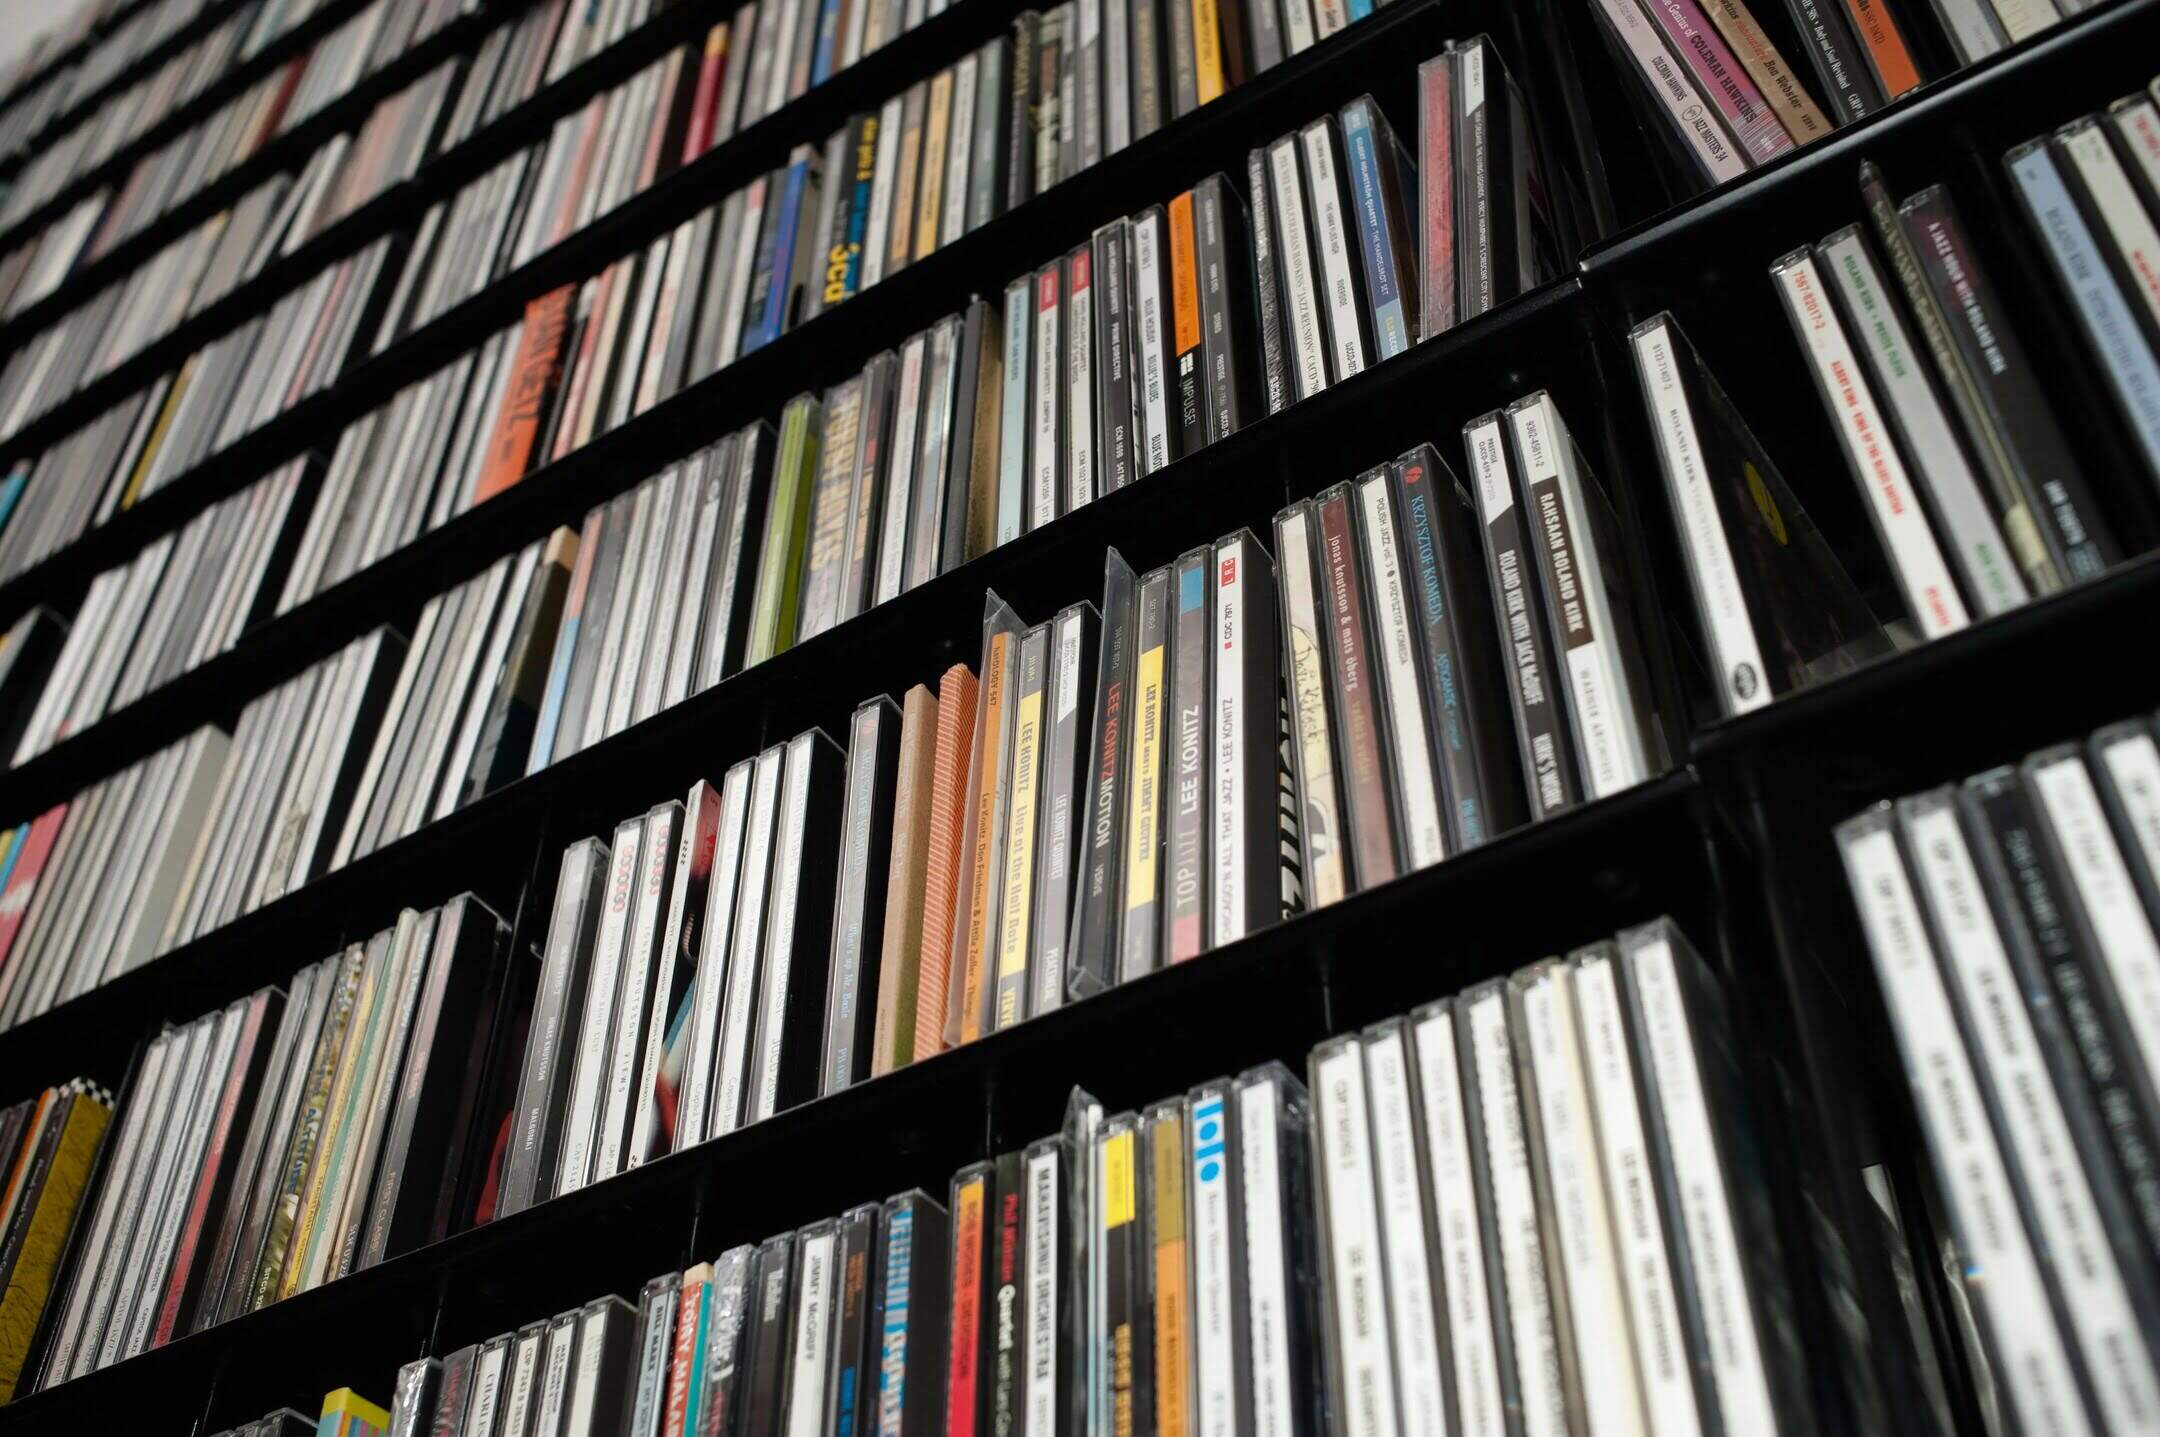 Review: CD Collection – A Comprehensive Analysis